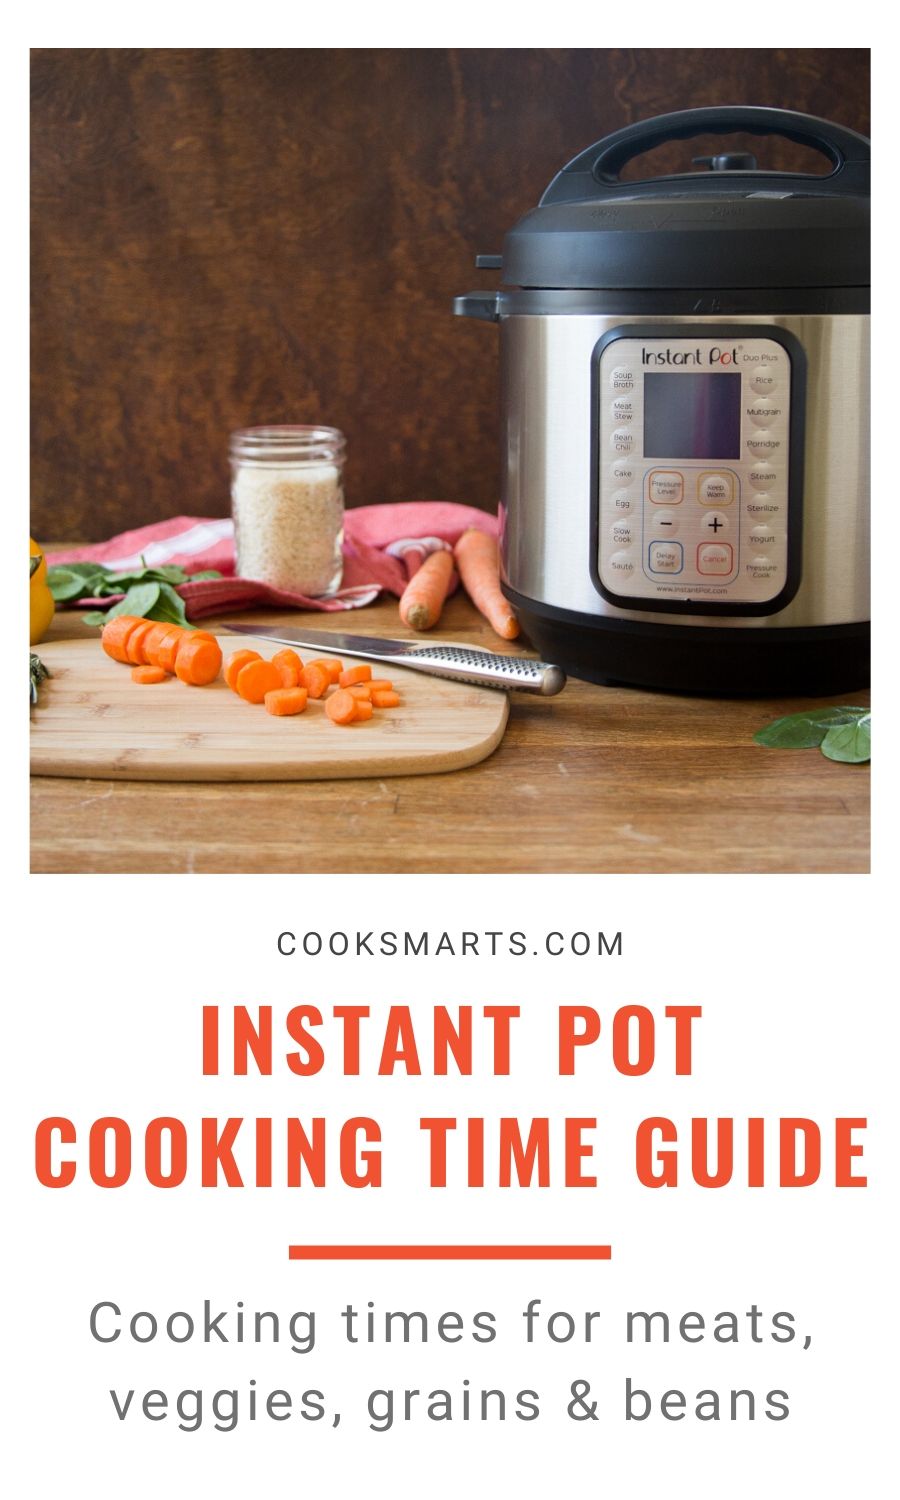 Instant Pot Cooking Times Cheat Sheet | Cook Smarts